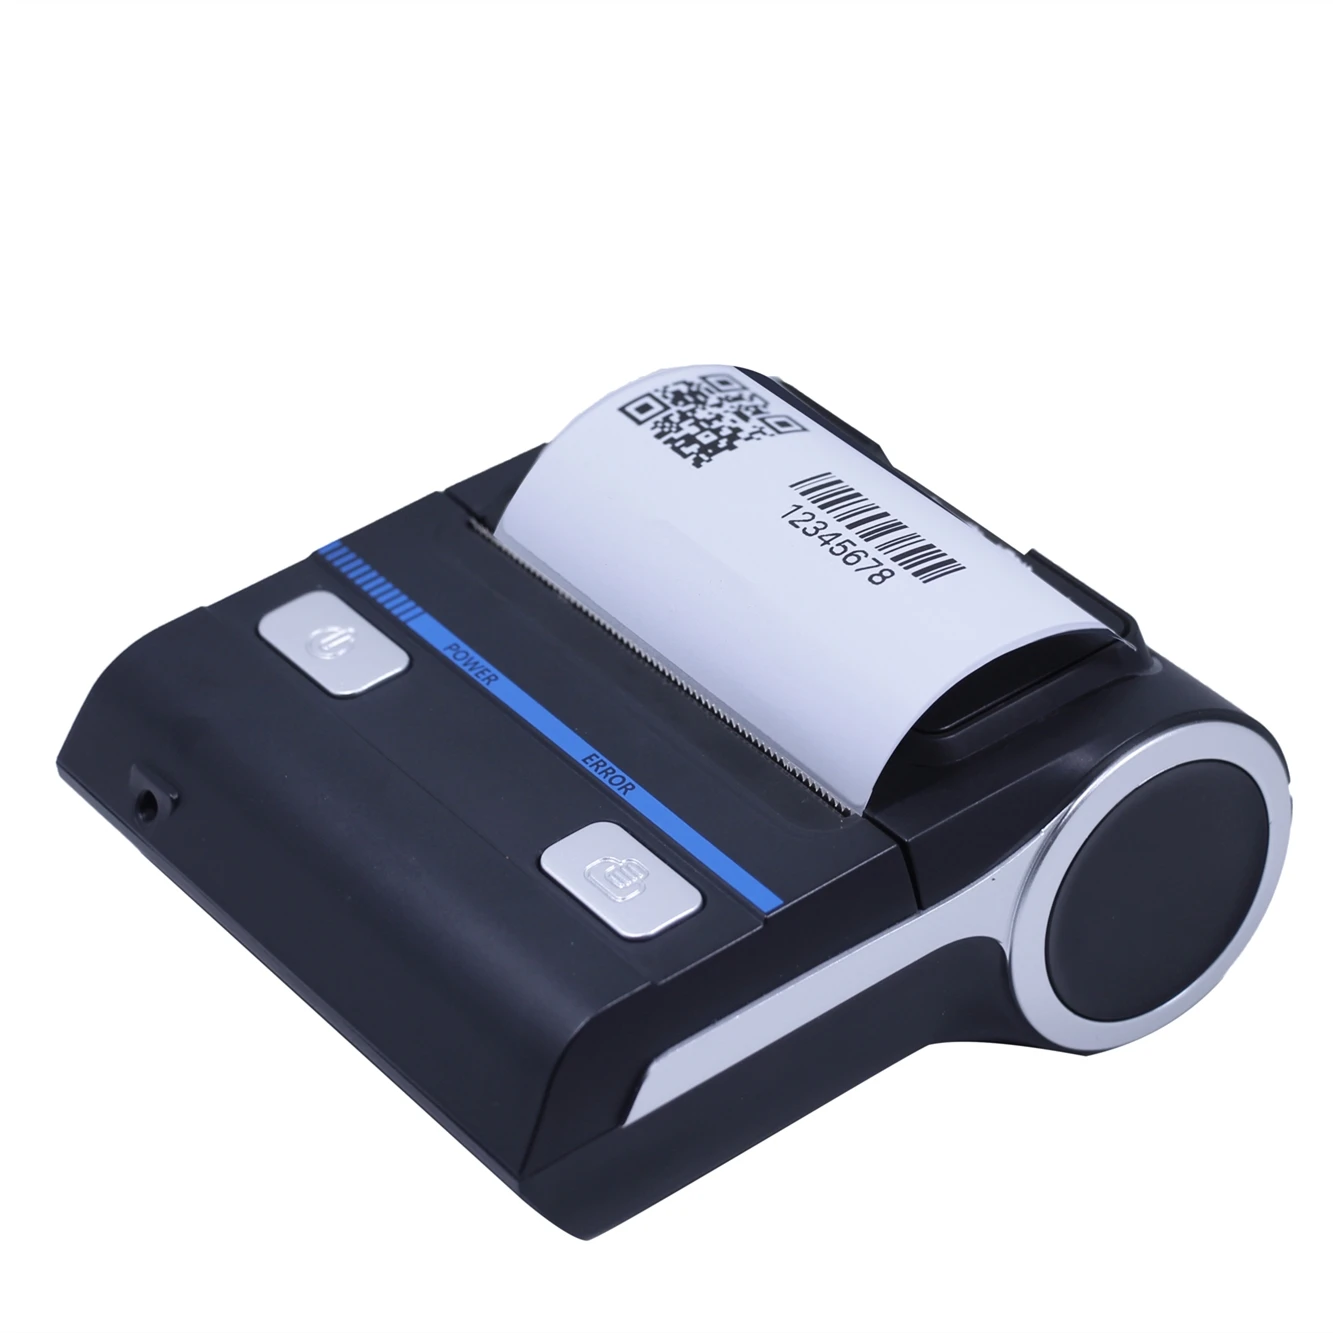 

Mini portable 80mm blue tooth thermal printer usb port thermal receipt printer with free application